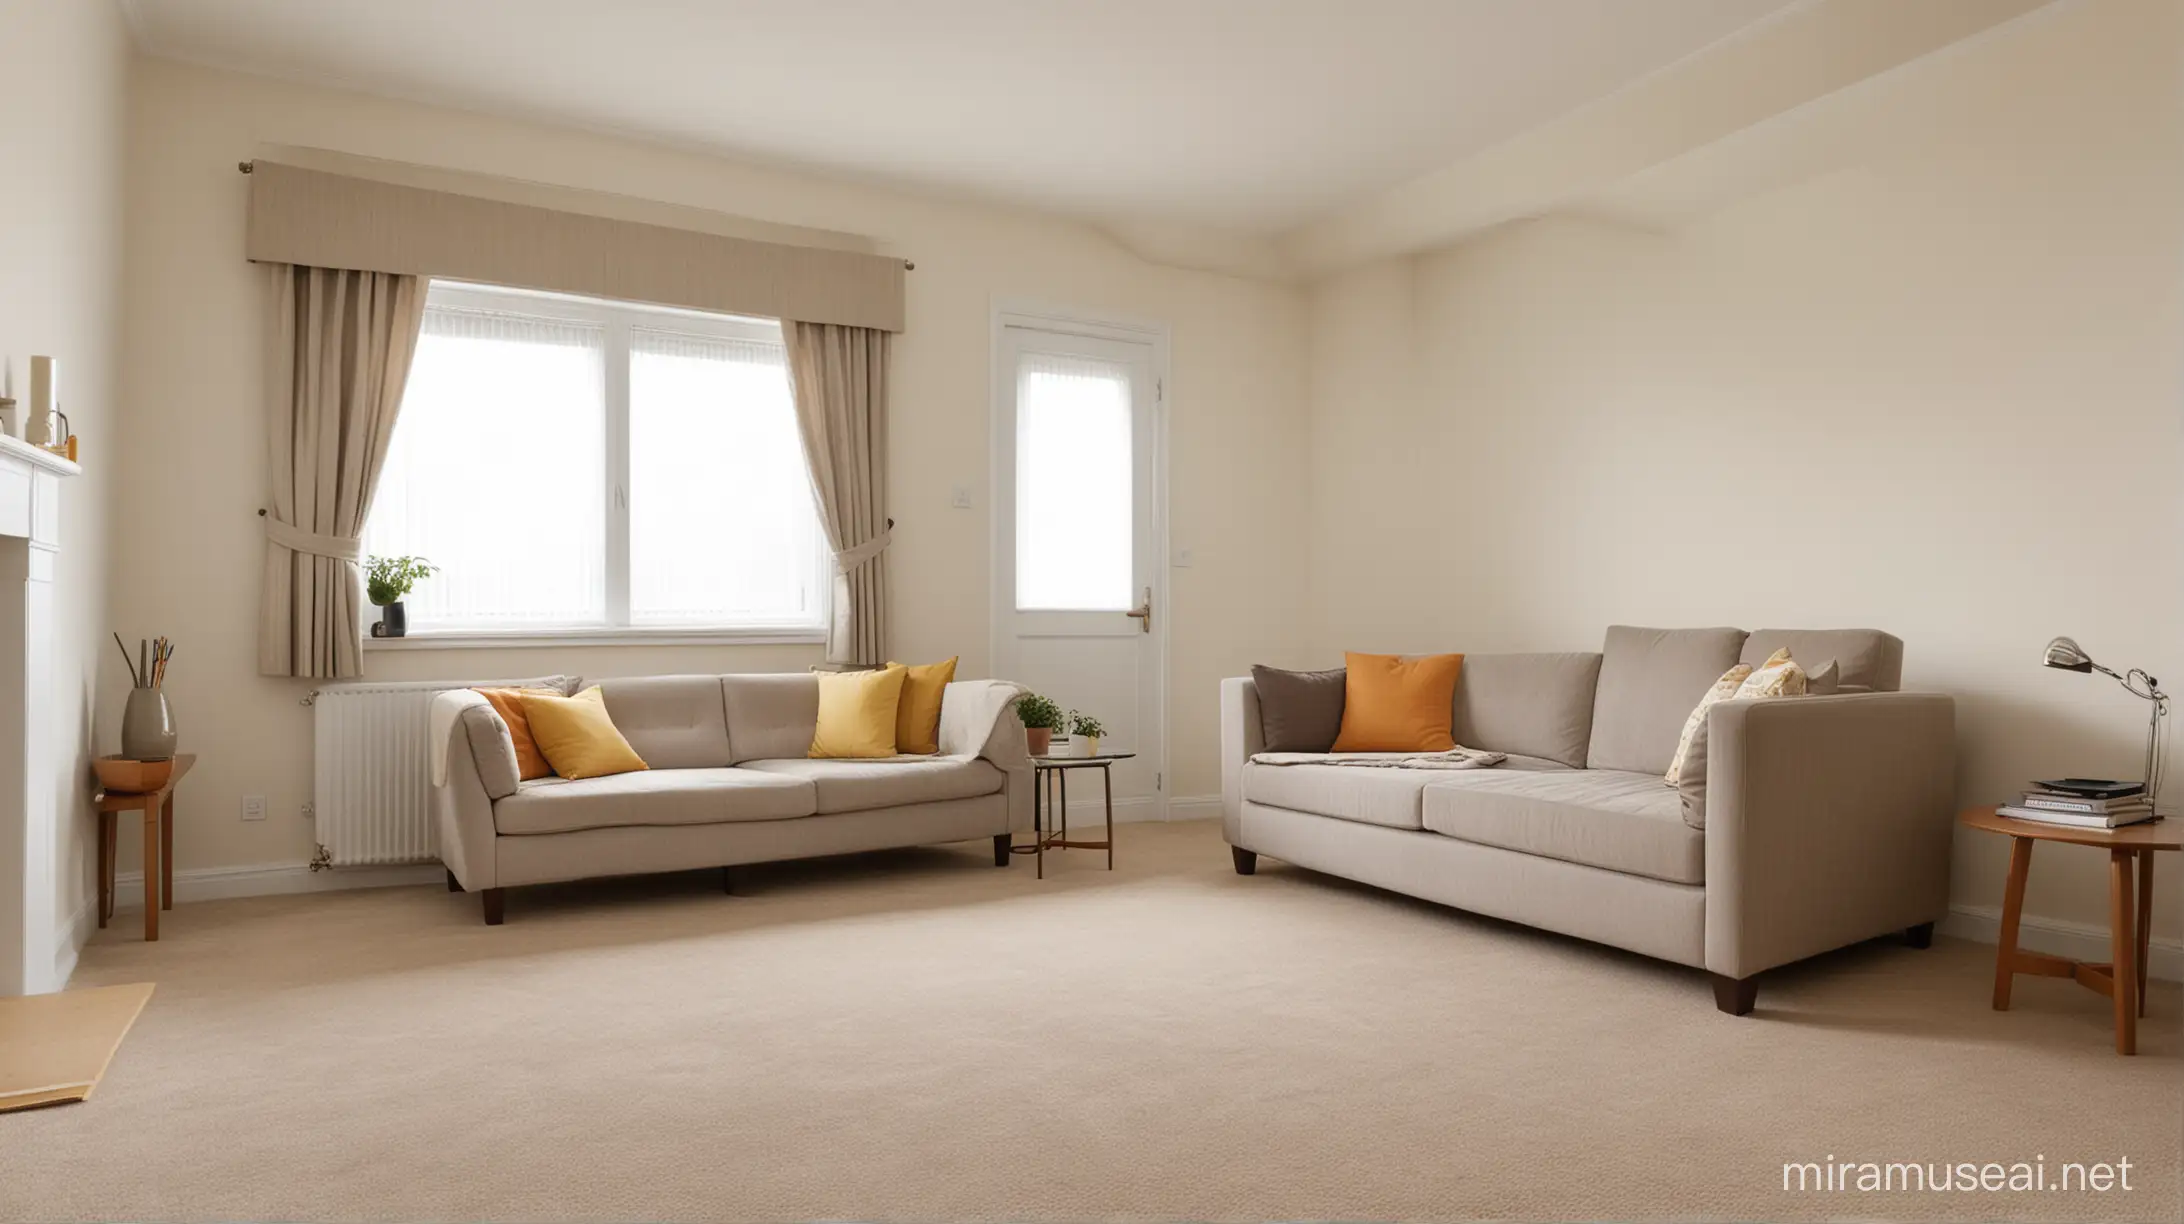 Cozy Living Room with Comfortable Sofa on Carpeted Floor